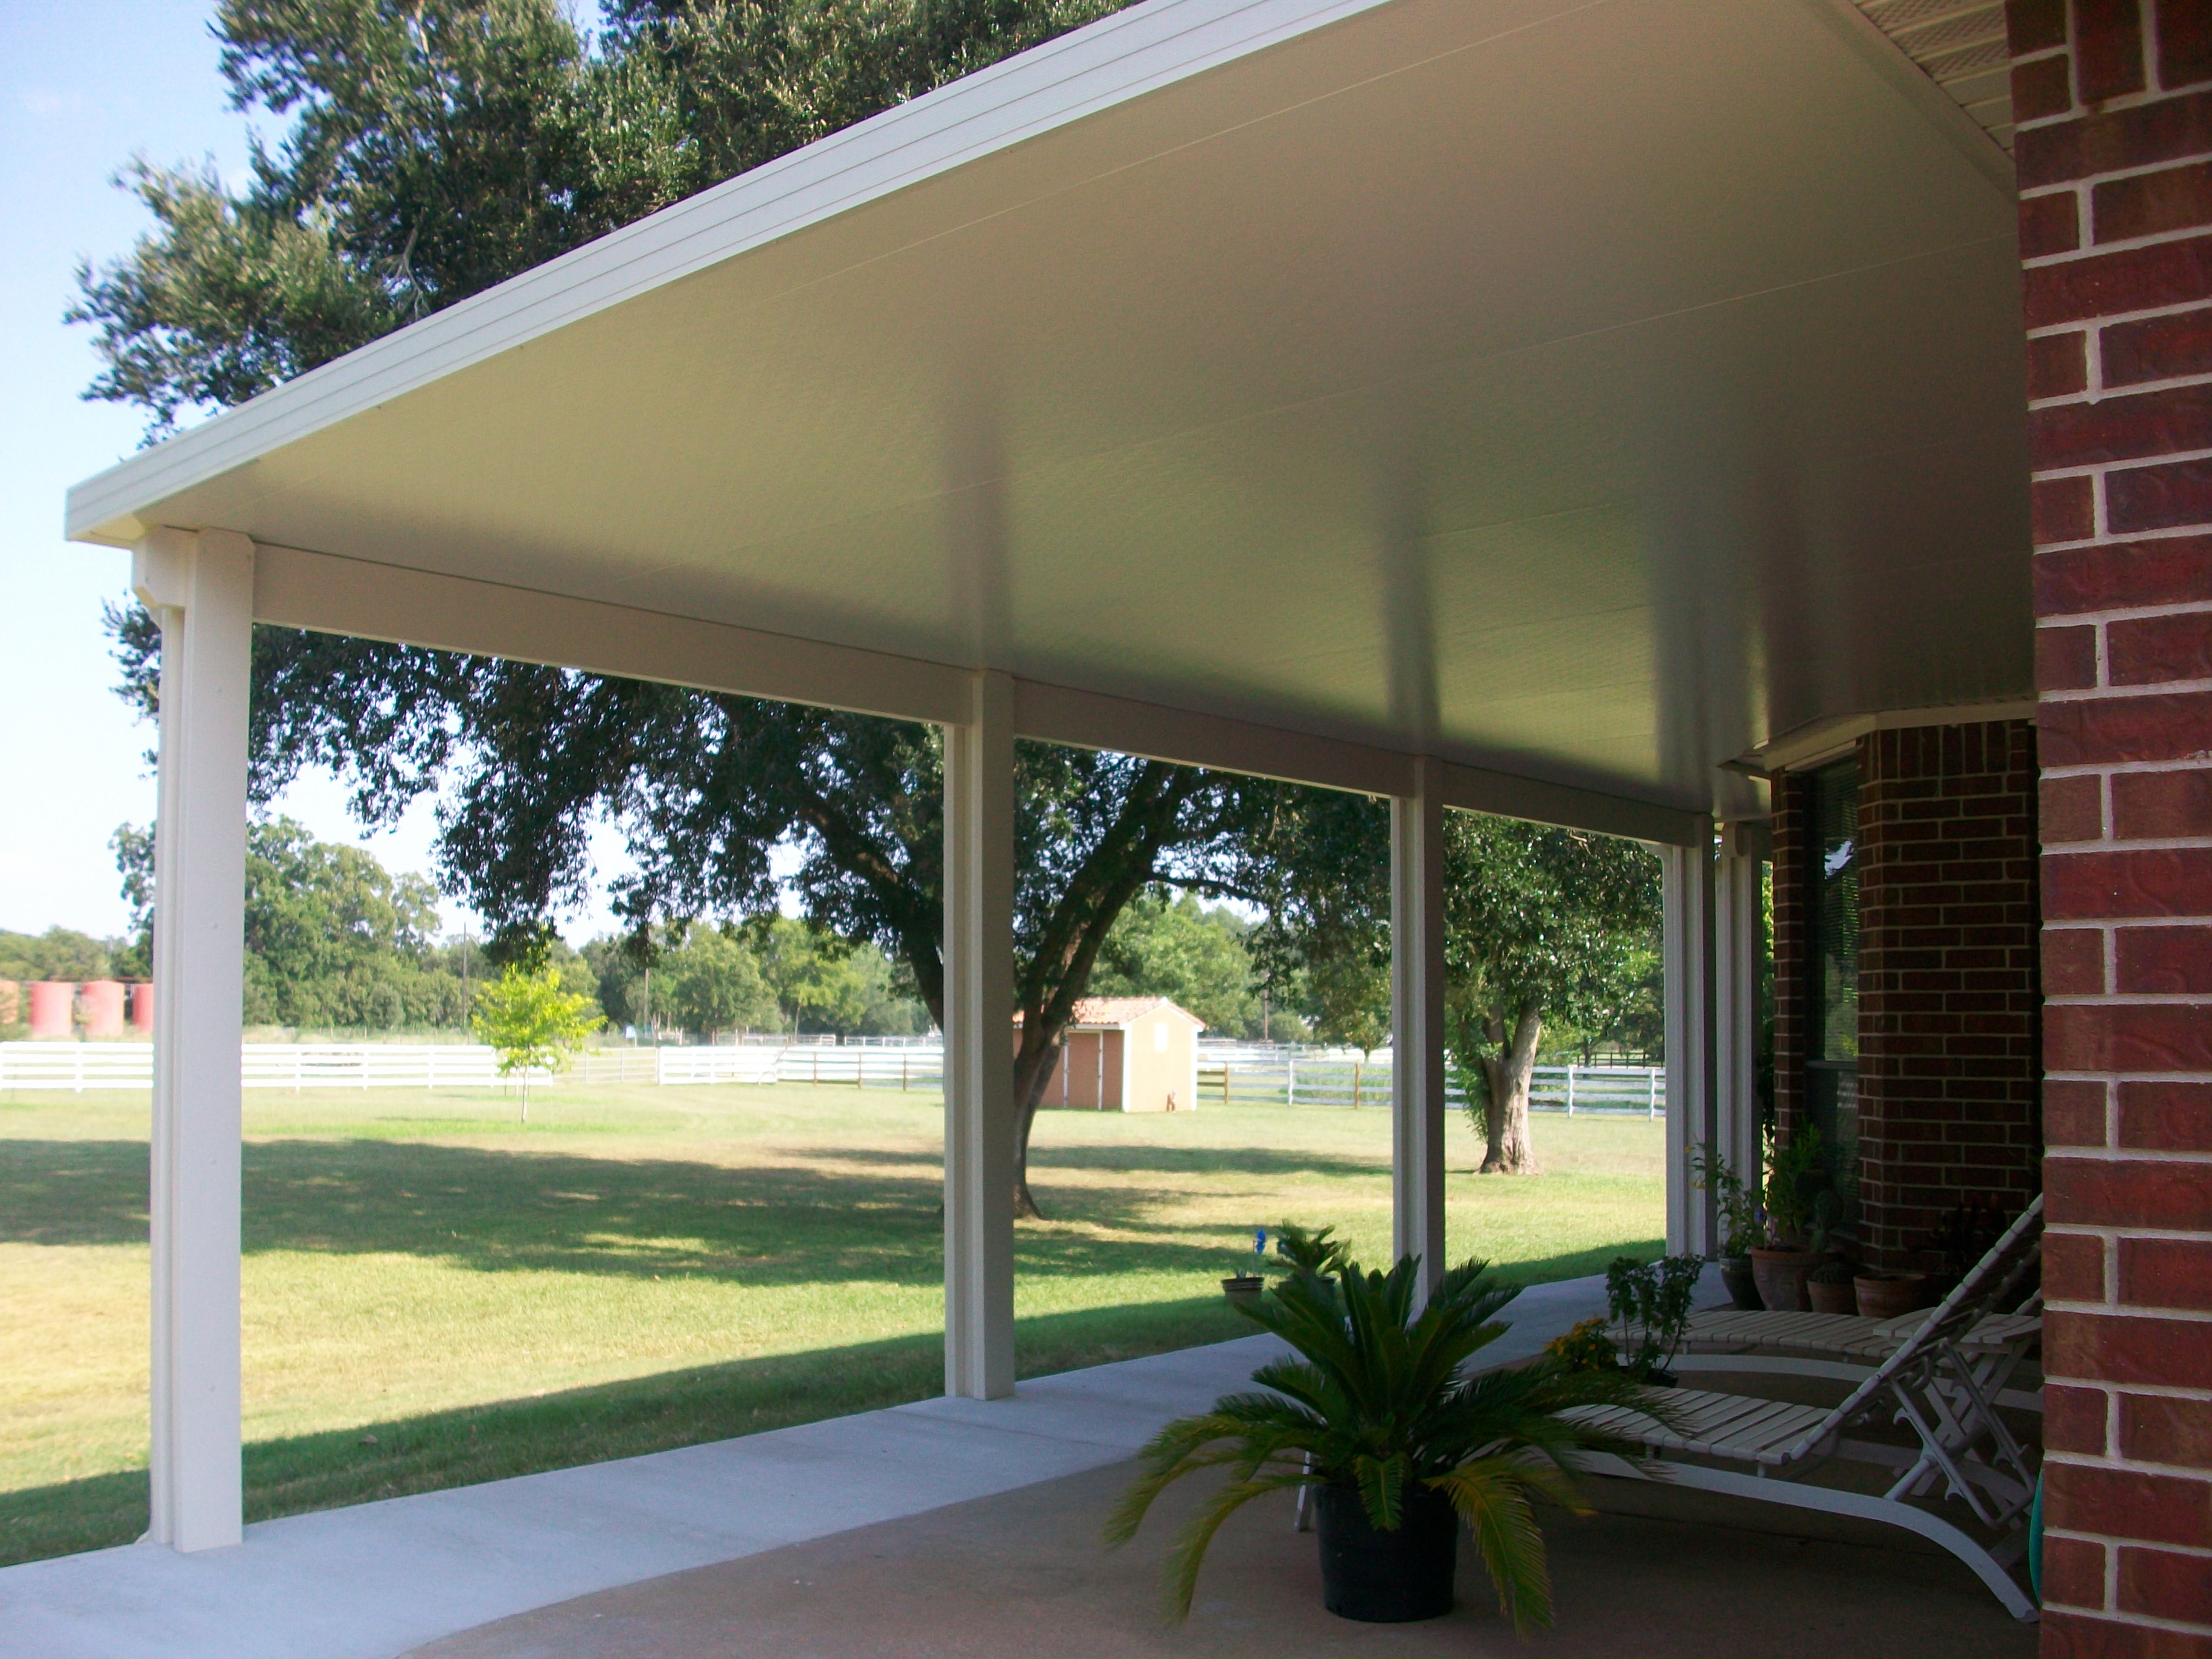 Insulated Roof Panels Texas Patio Covers